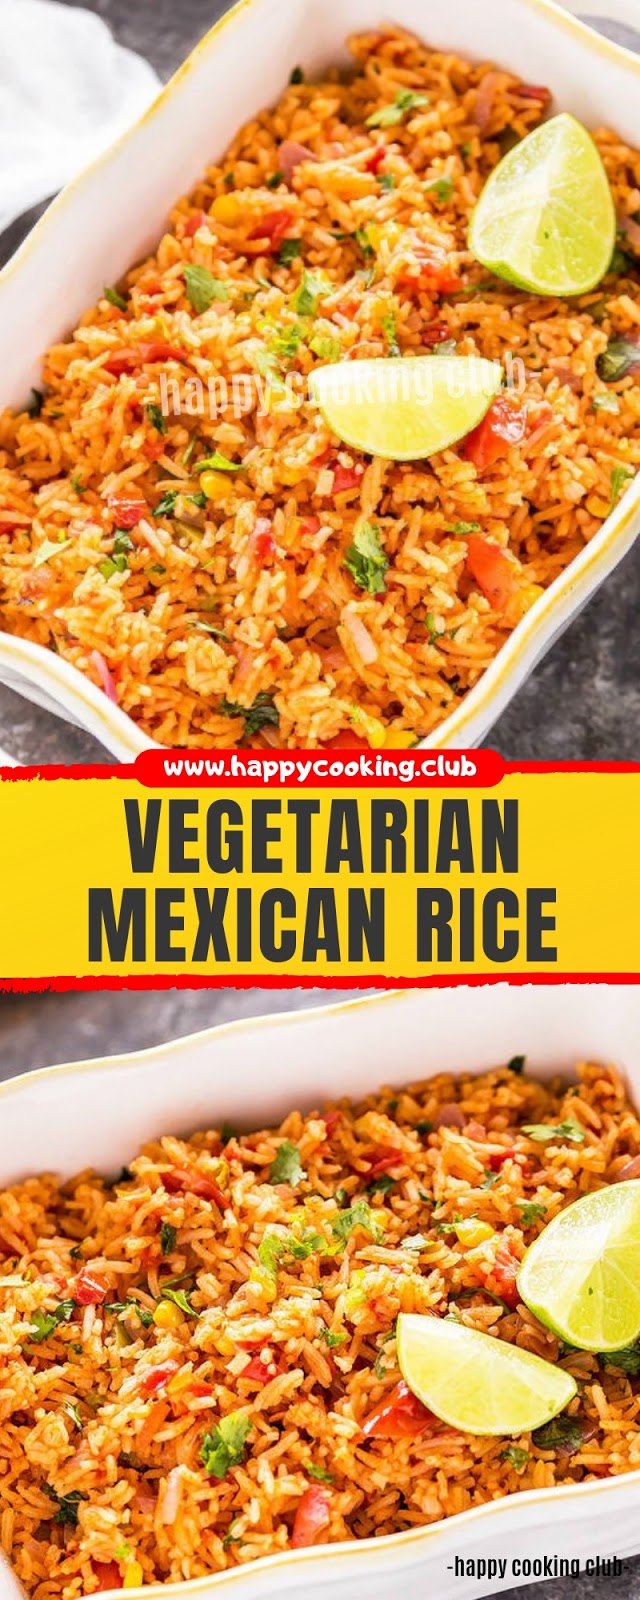 VEGETARIAN MEXICAN RICE